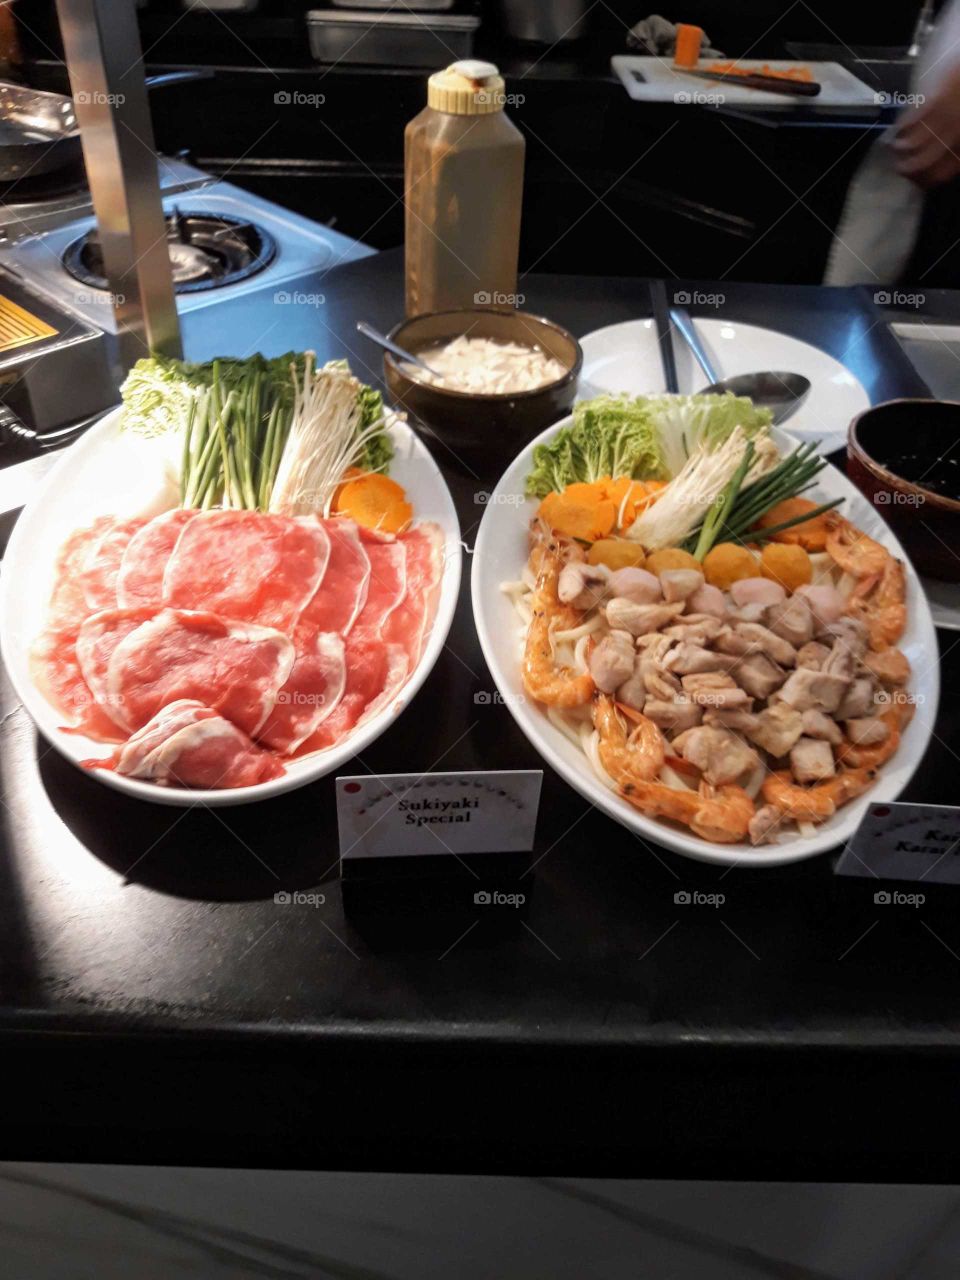 Sukiyaki in an eat-all-you-can restaurant in Makati, Philippines